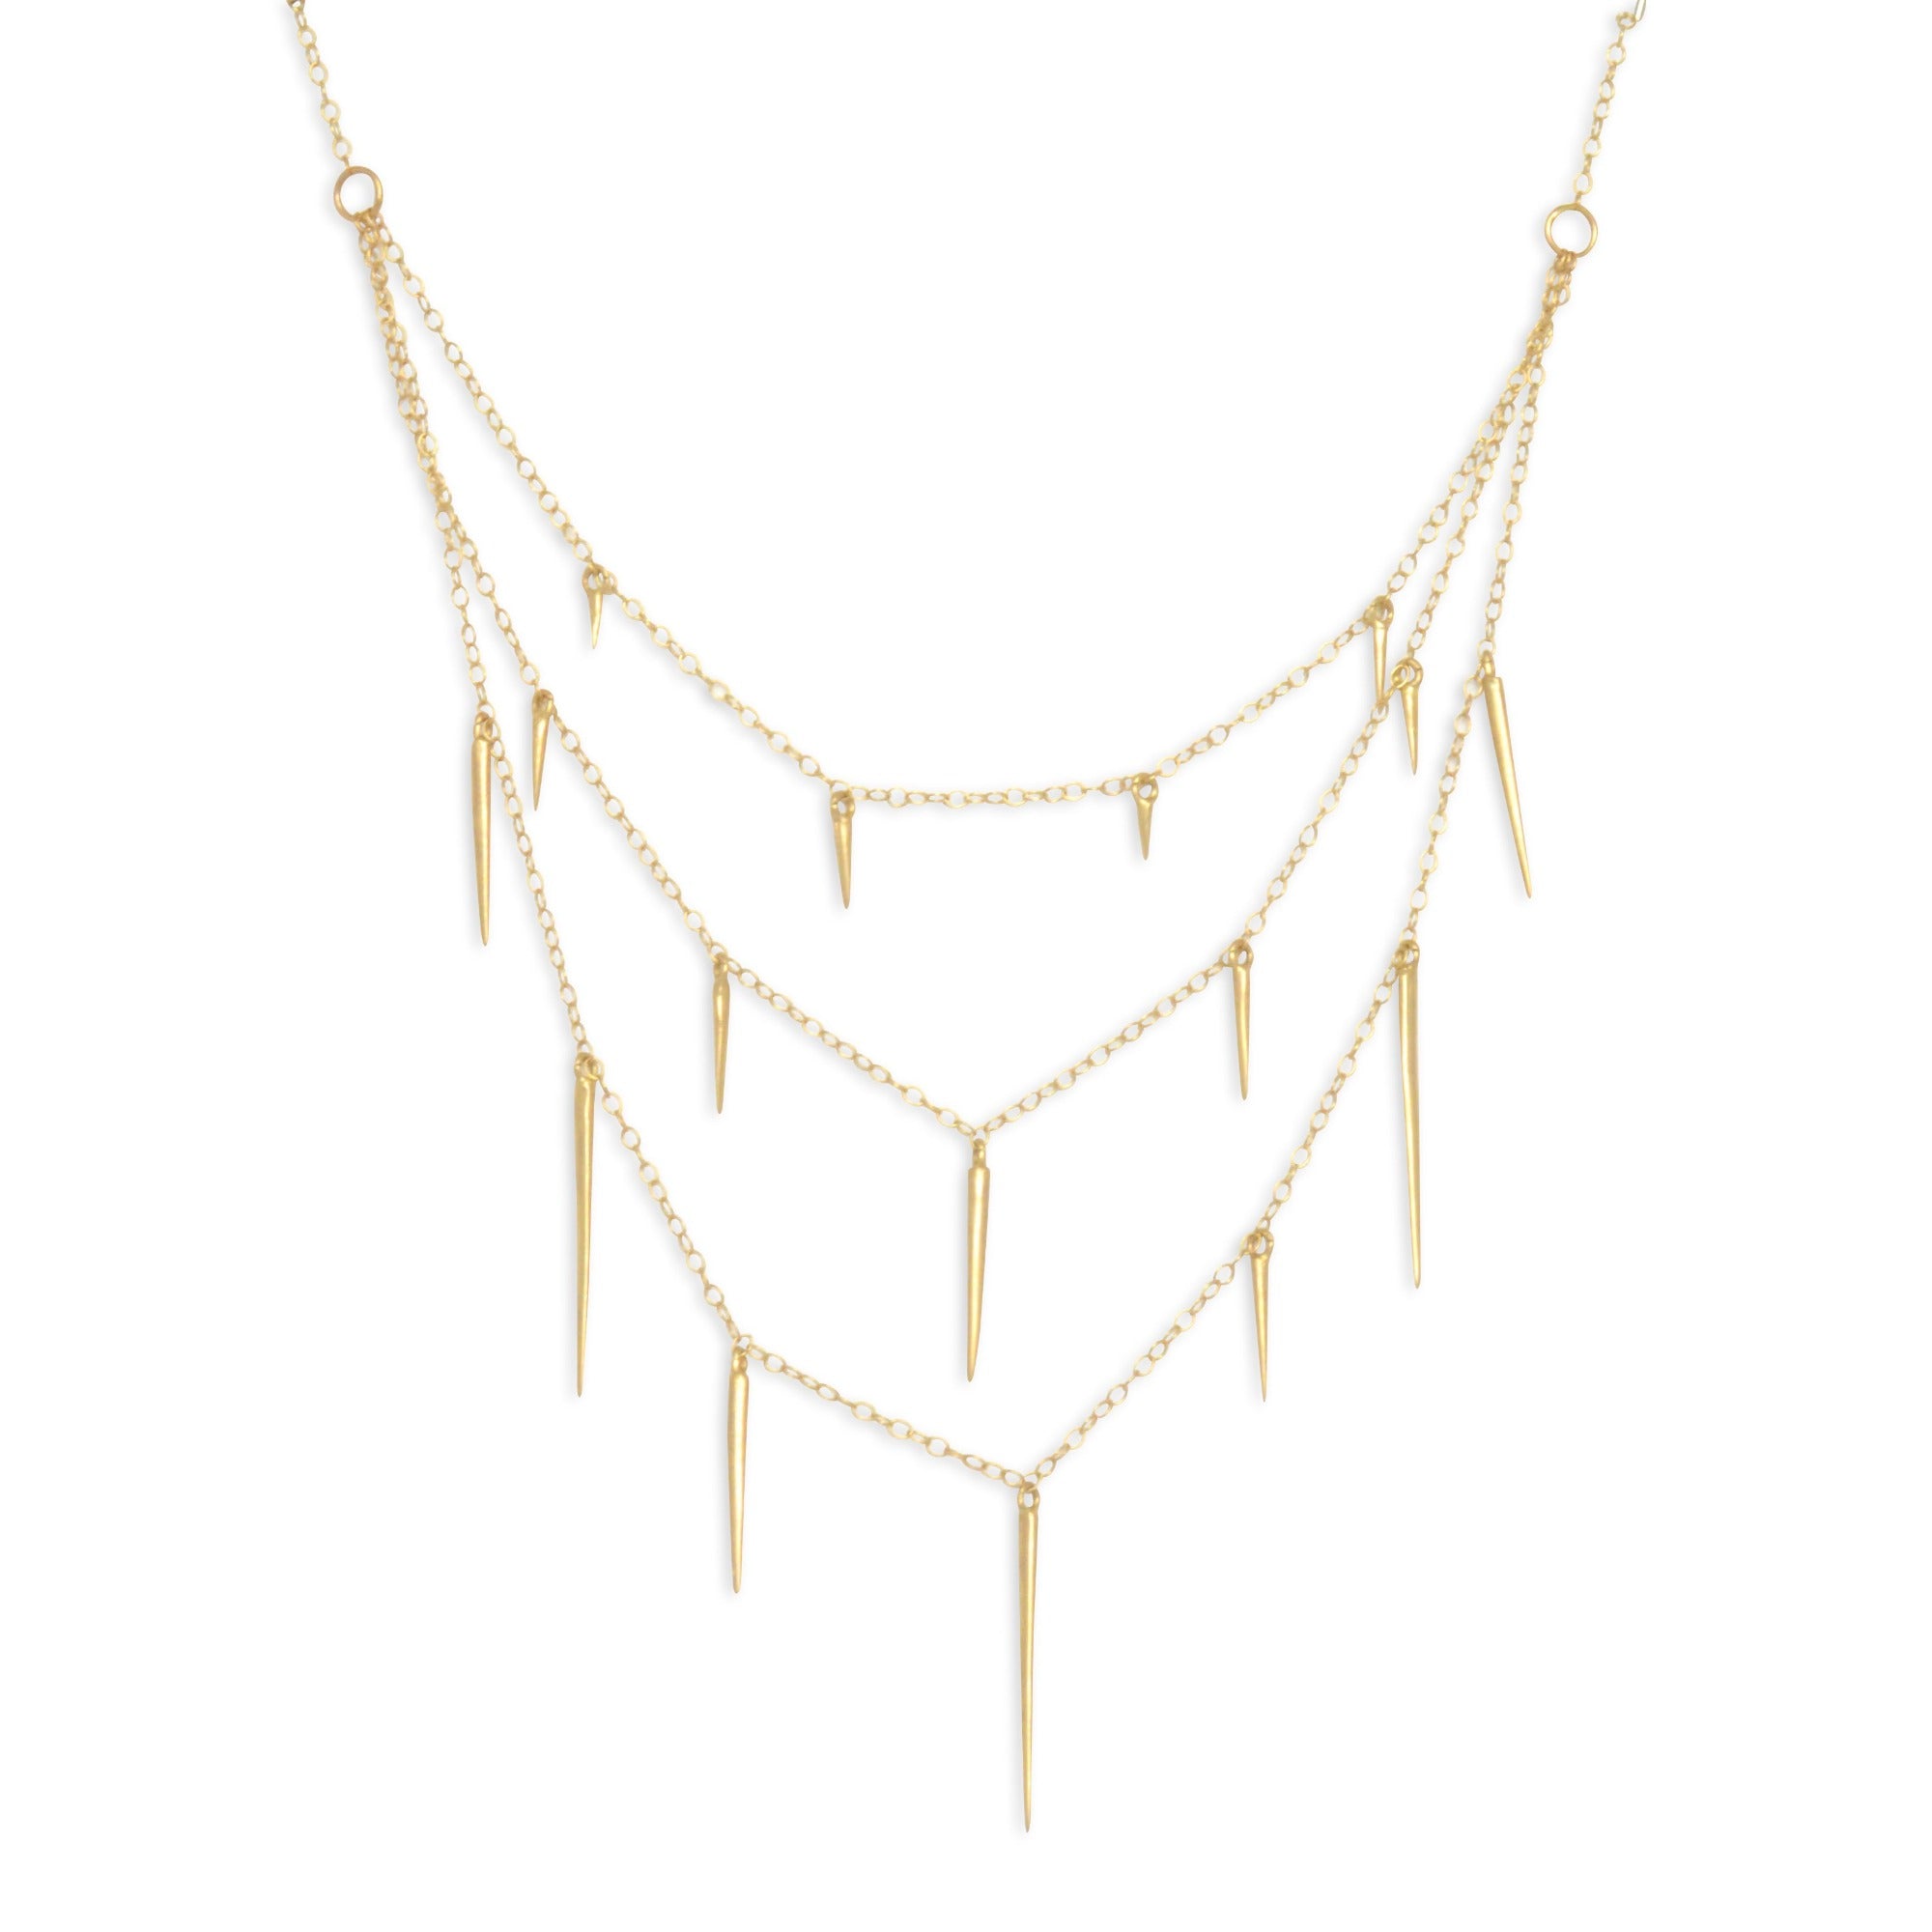 18k yellow gold small point three tier necklace